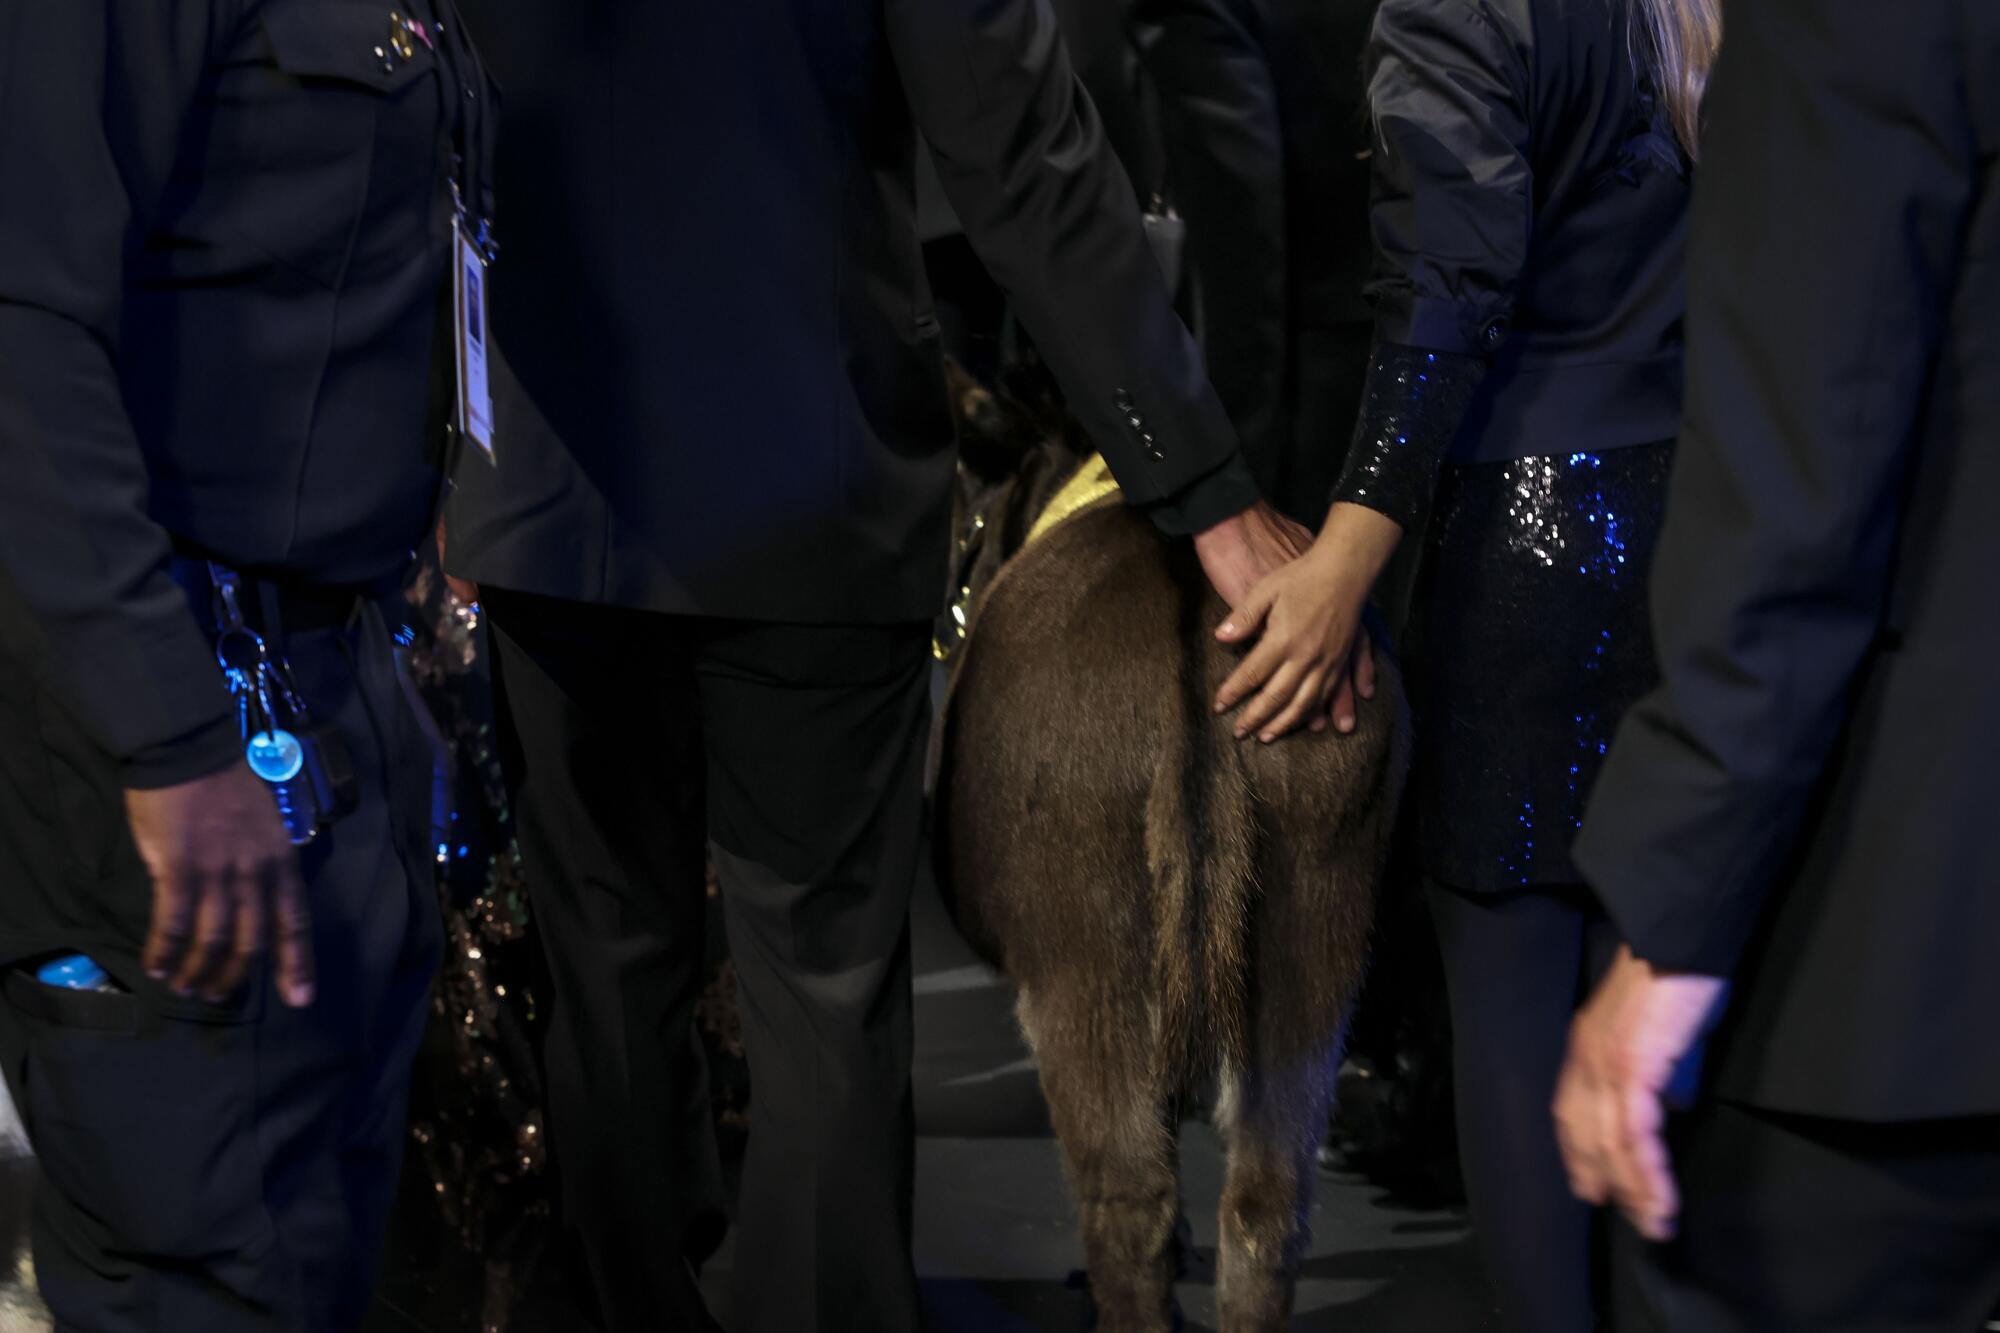 A donkey is moved through a crowd of people in suits, with two hands on the donkey's rear end.